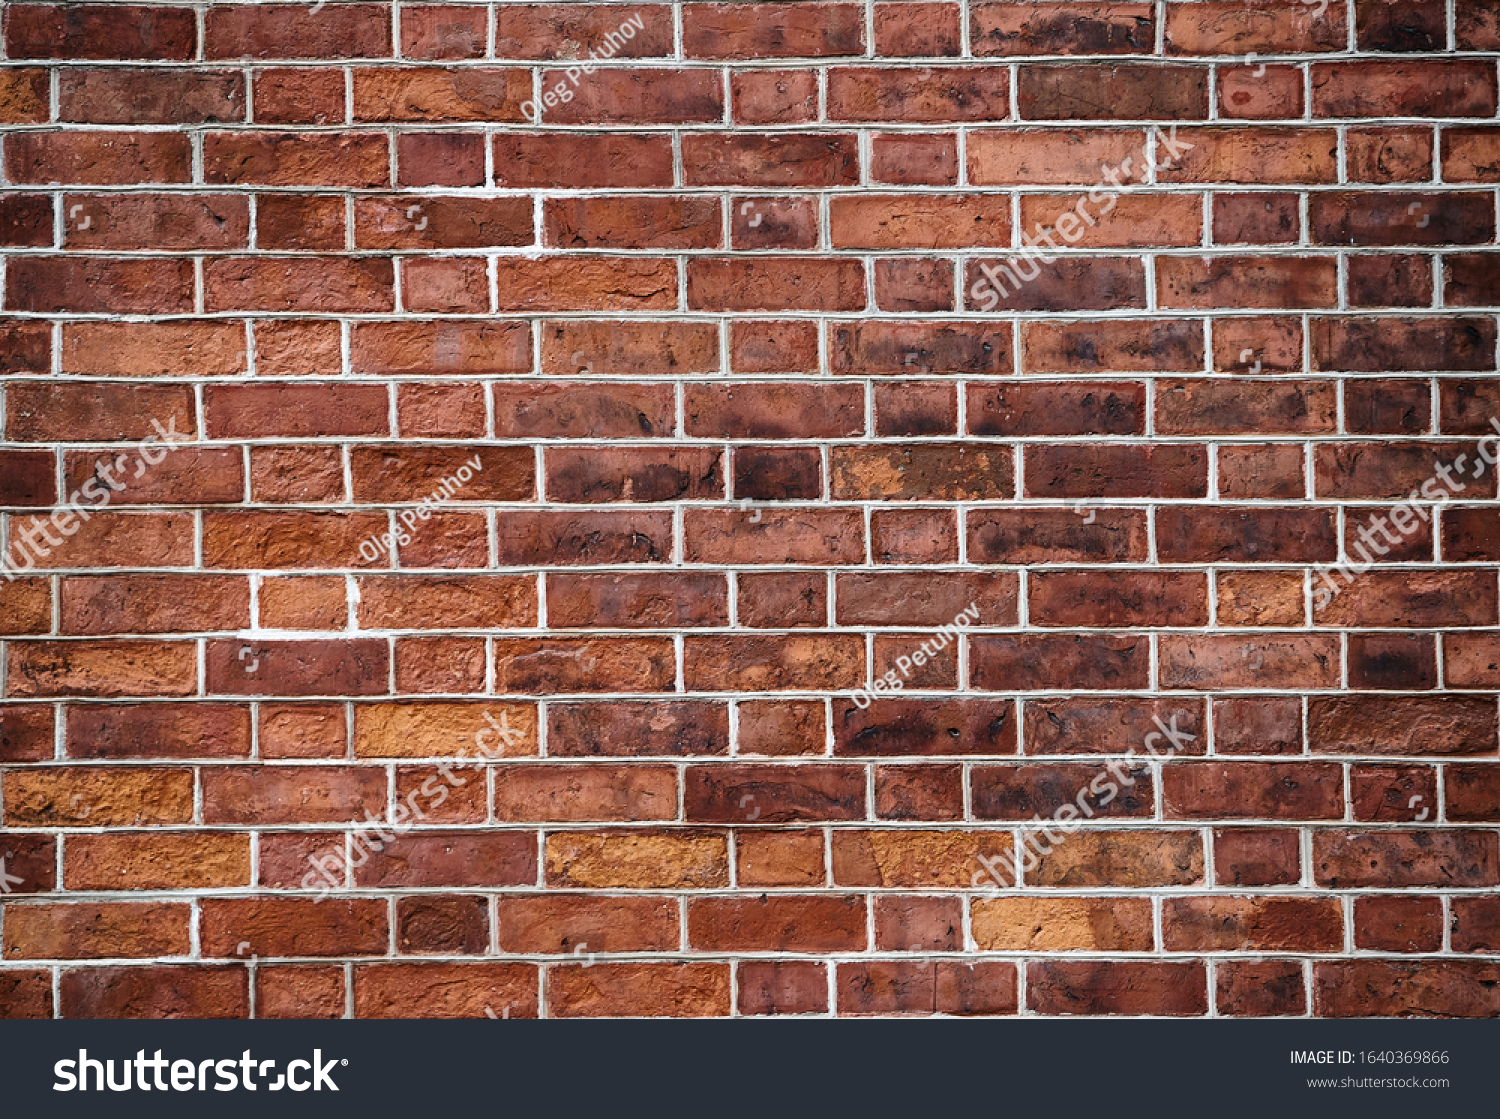 Red grunge brick wall, abstract background texture with old dirty and vintage style pattern #1640369866